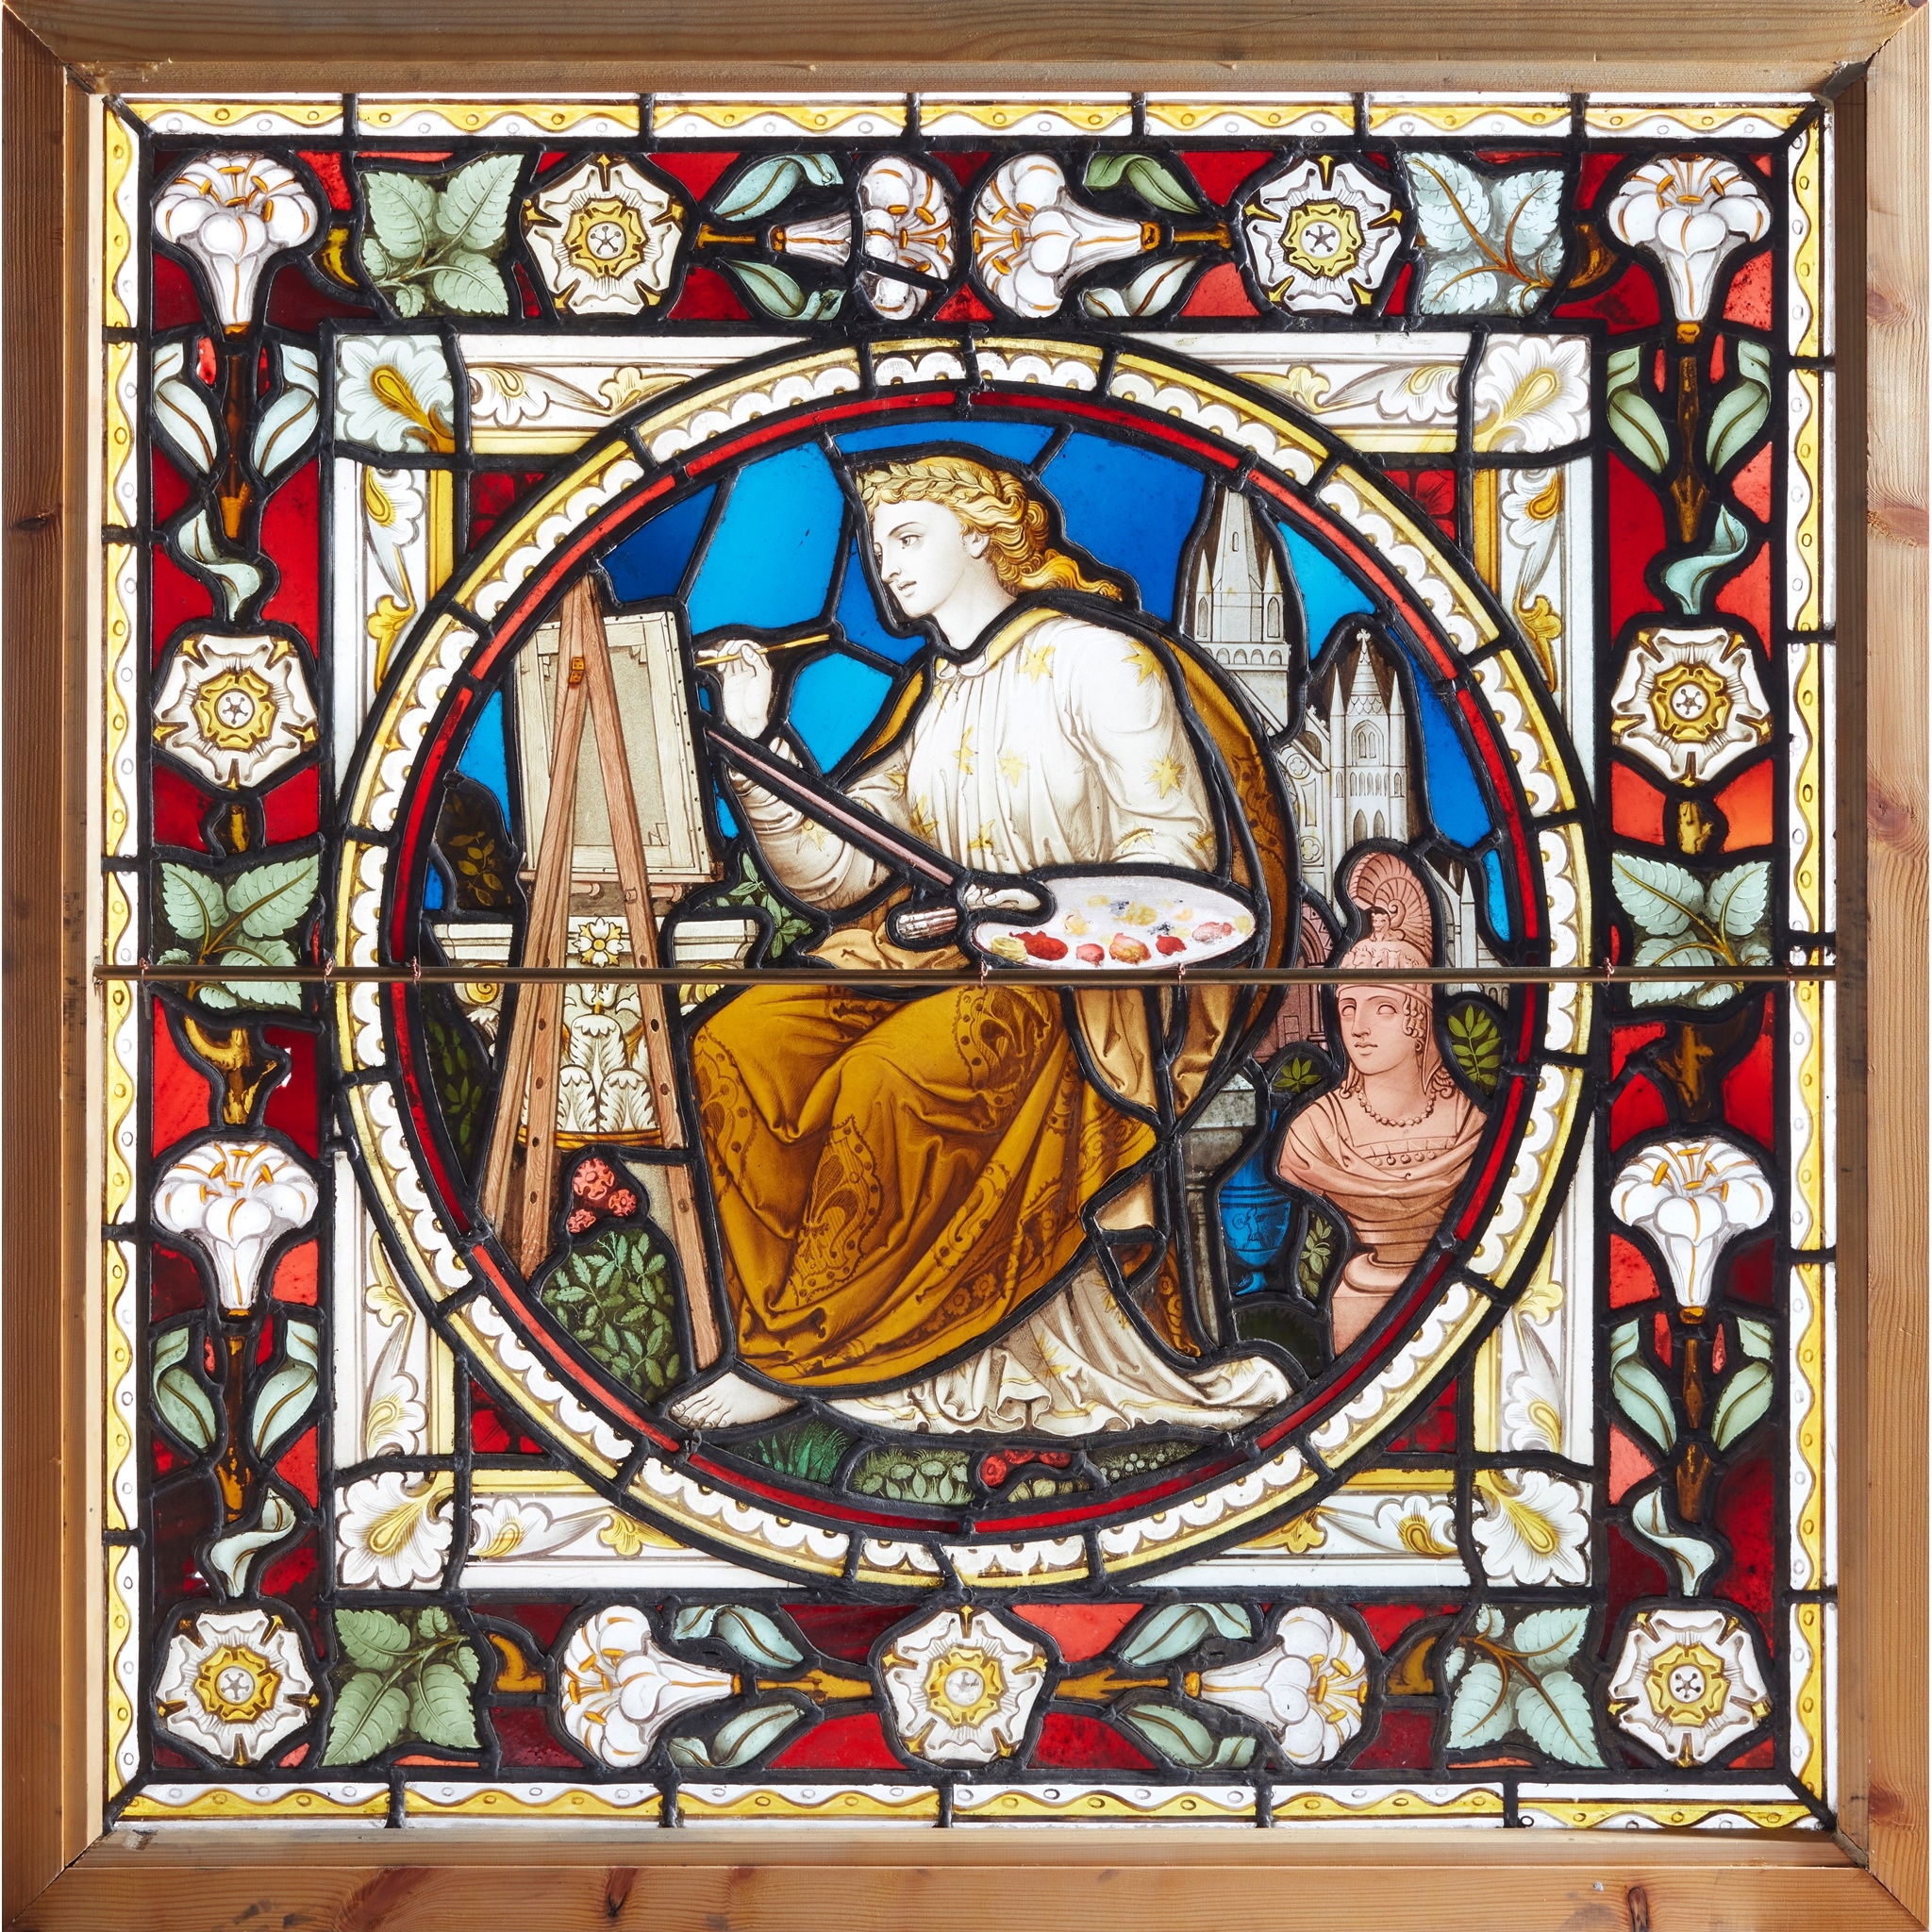 Artwork by John Richard  Clayton, 'ART', GOTHIC REVIVAL STAINED GLASS PANEL., Made of painted, stained and leaded glass within later pine frames with brass strengthening bar